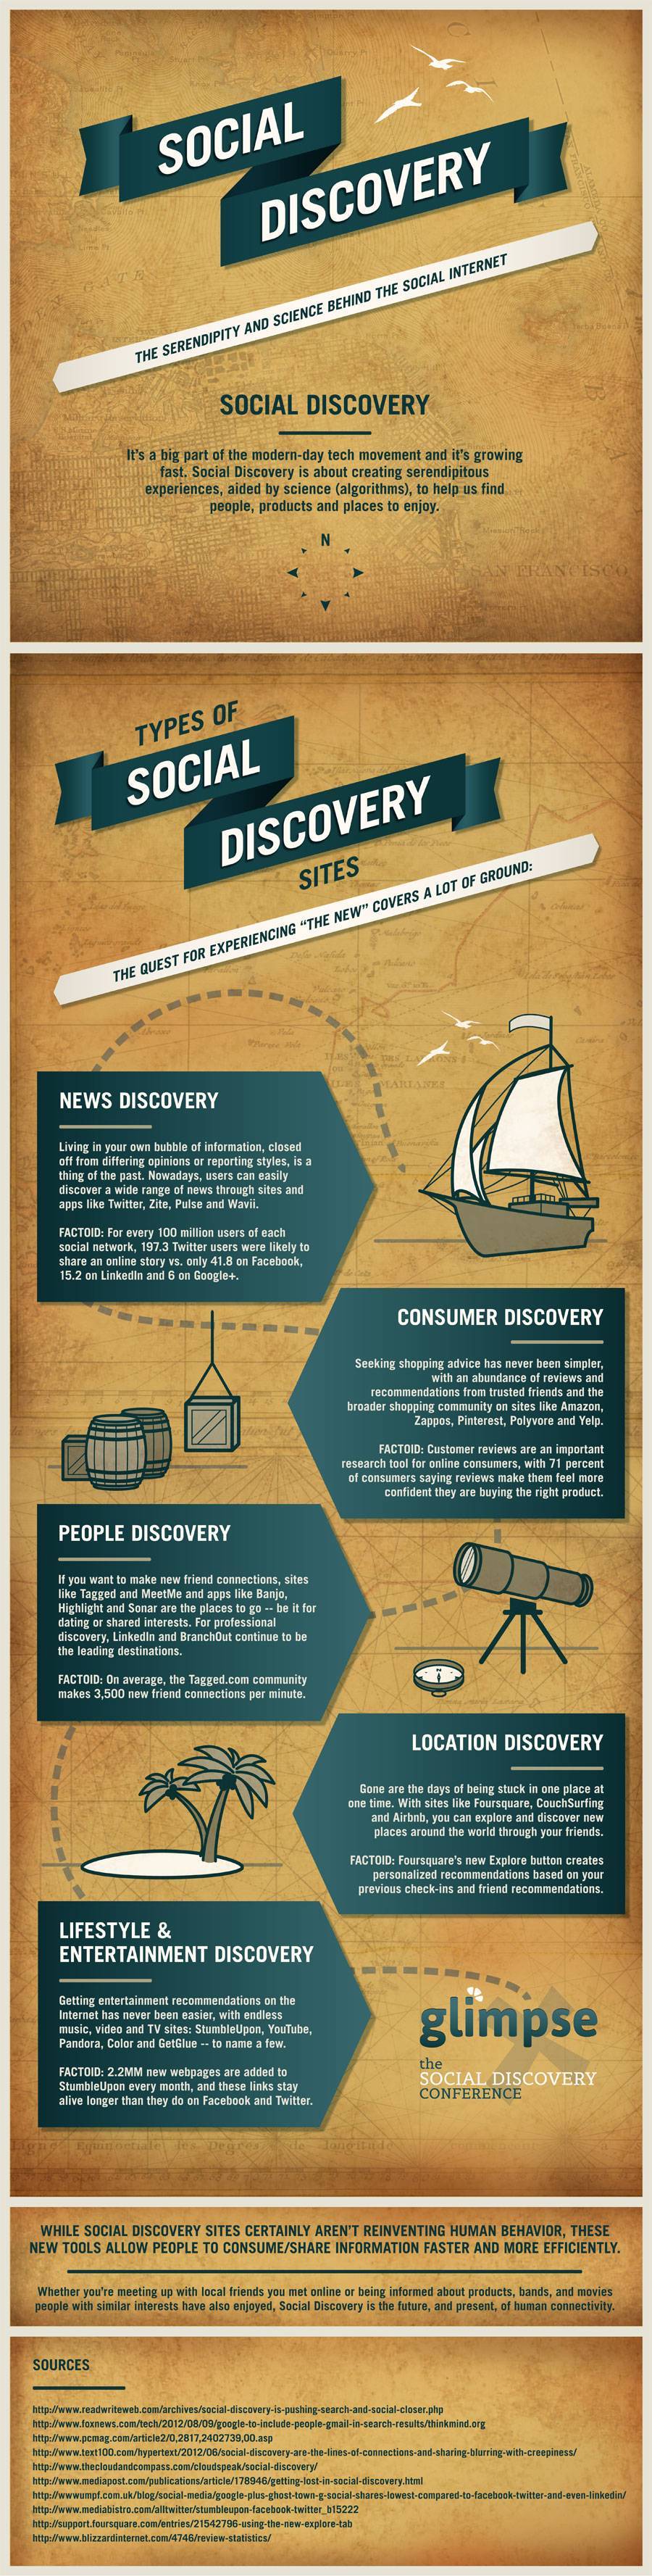 social-discovery-networking-tools-infographic